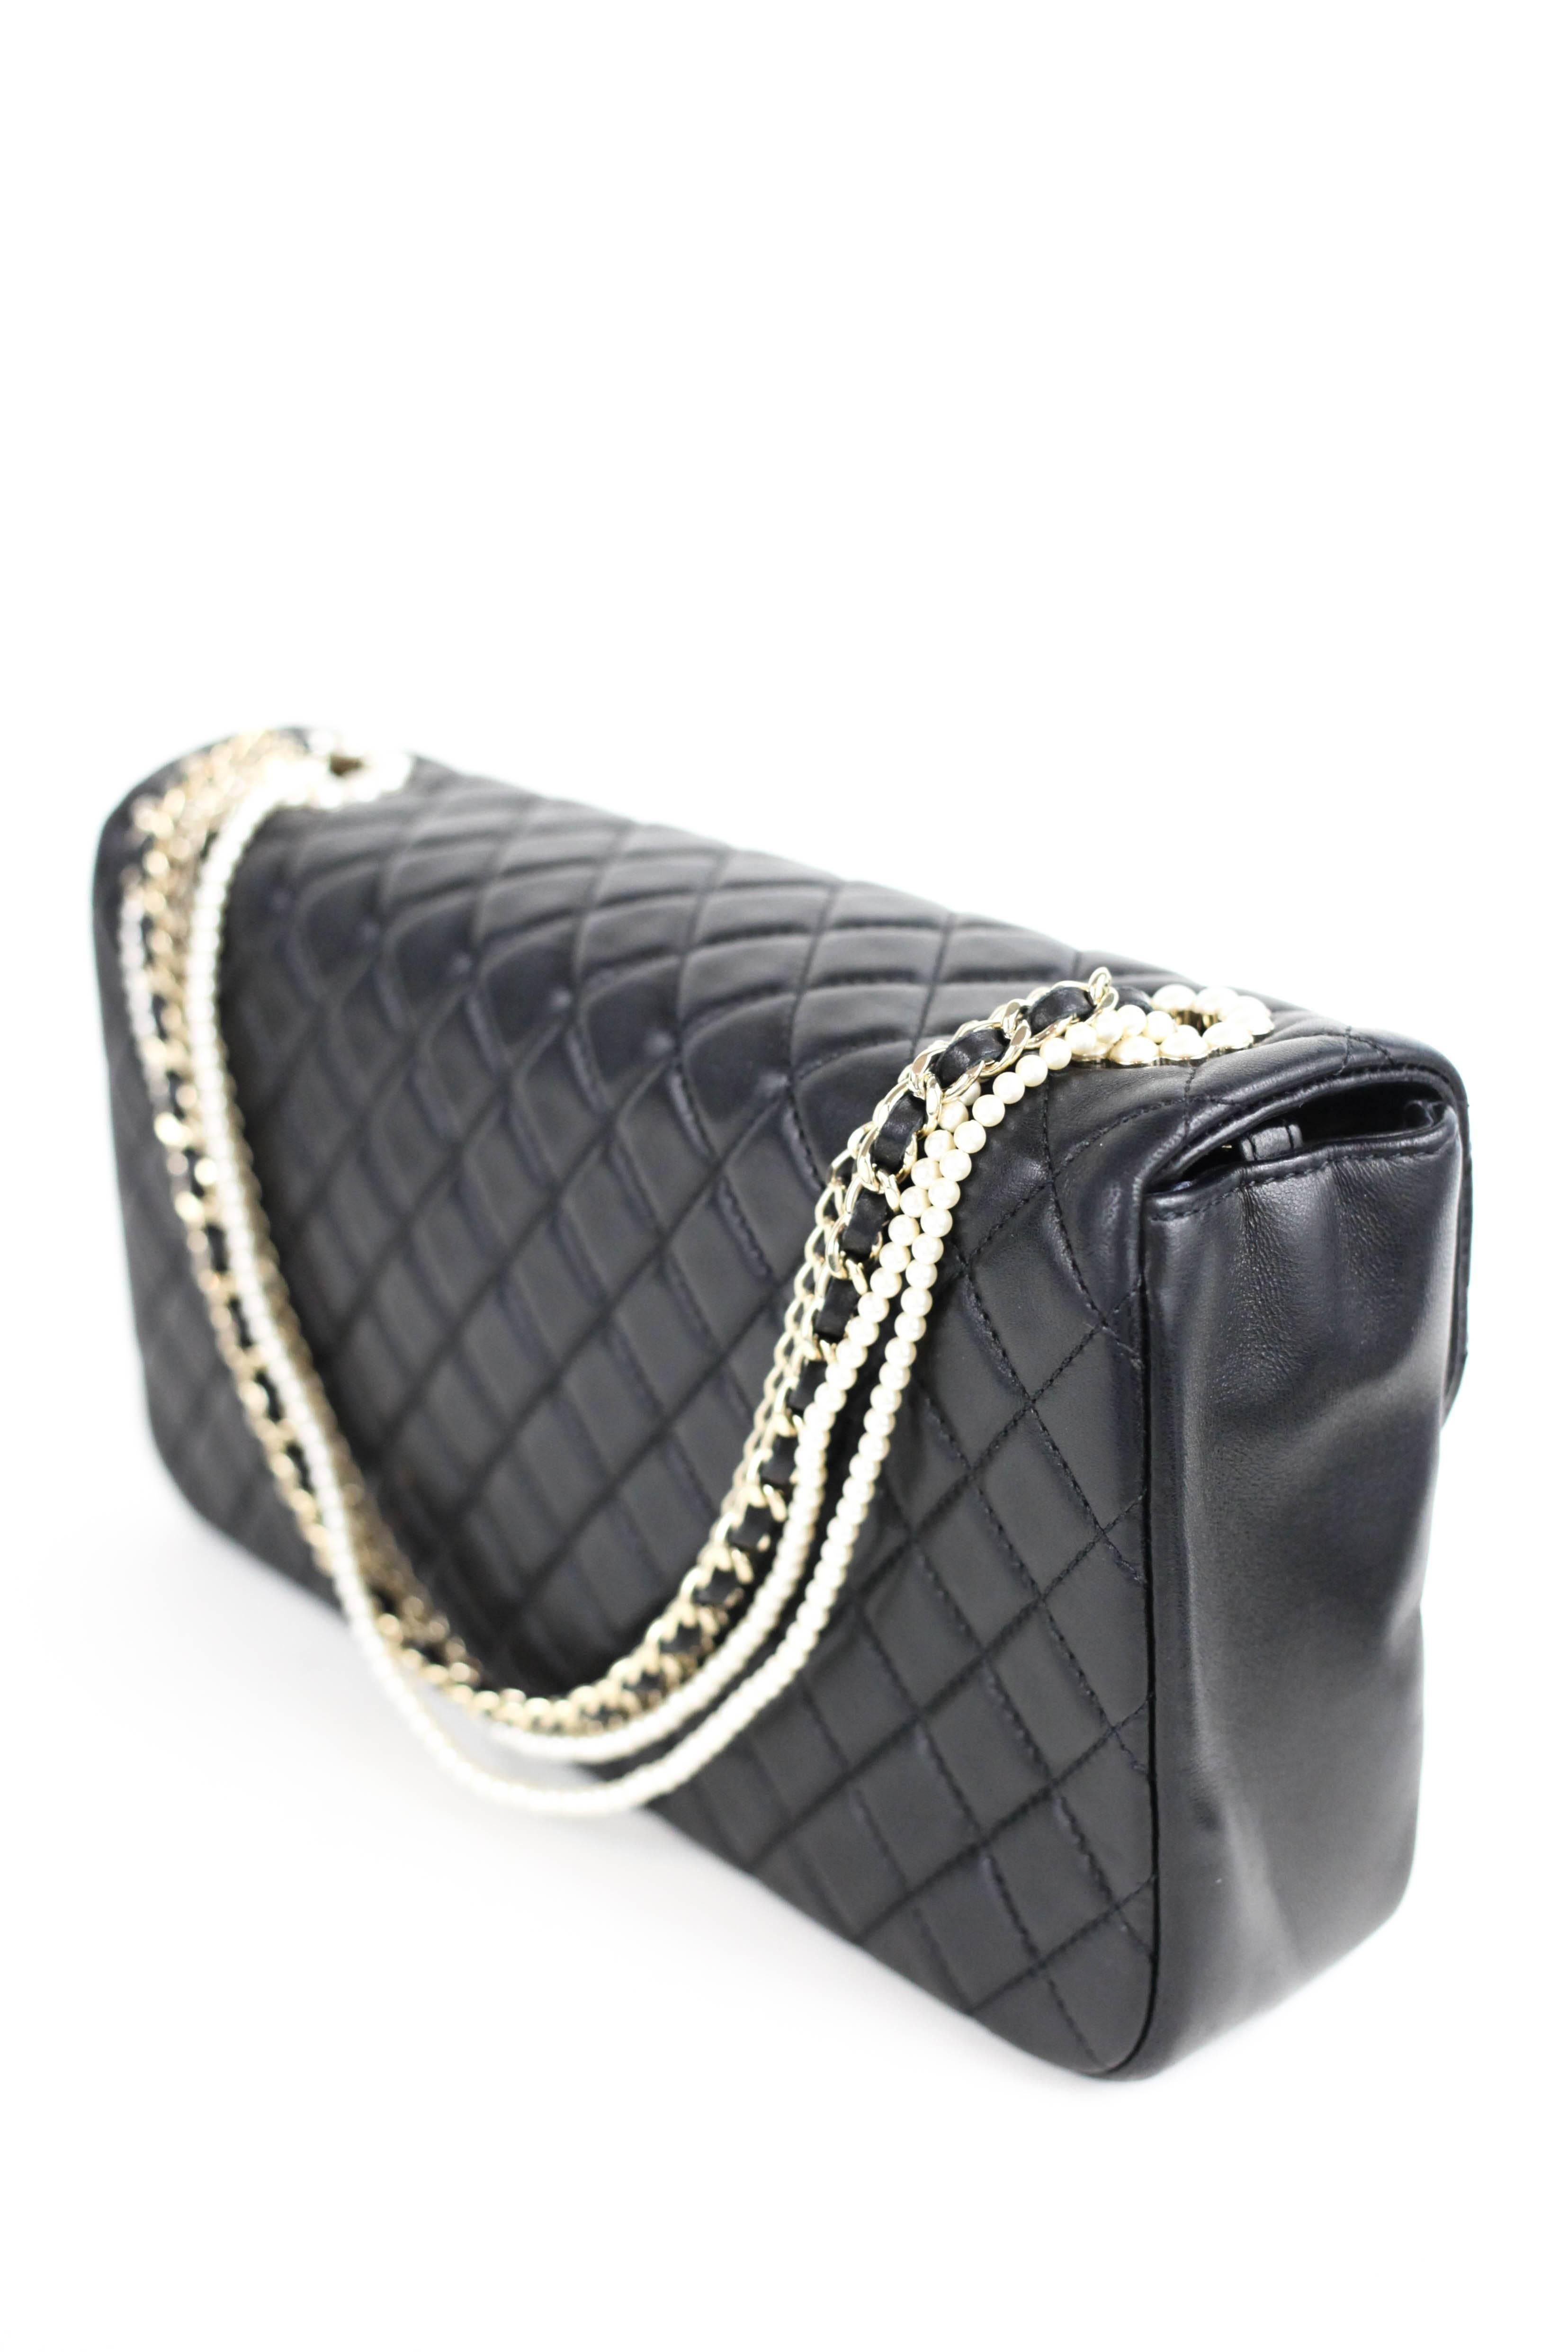 Black CHANEL Quilted Lambskin Westminster Medium Flap 